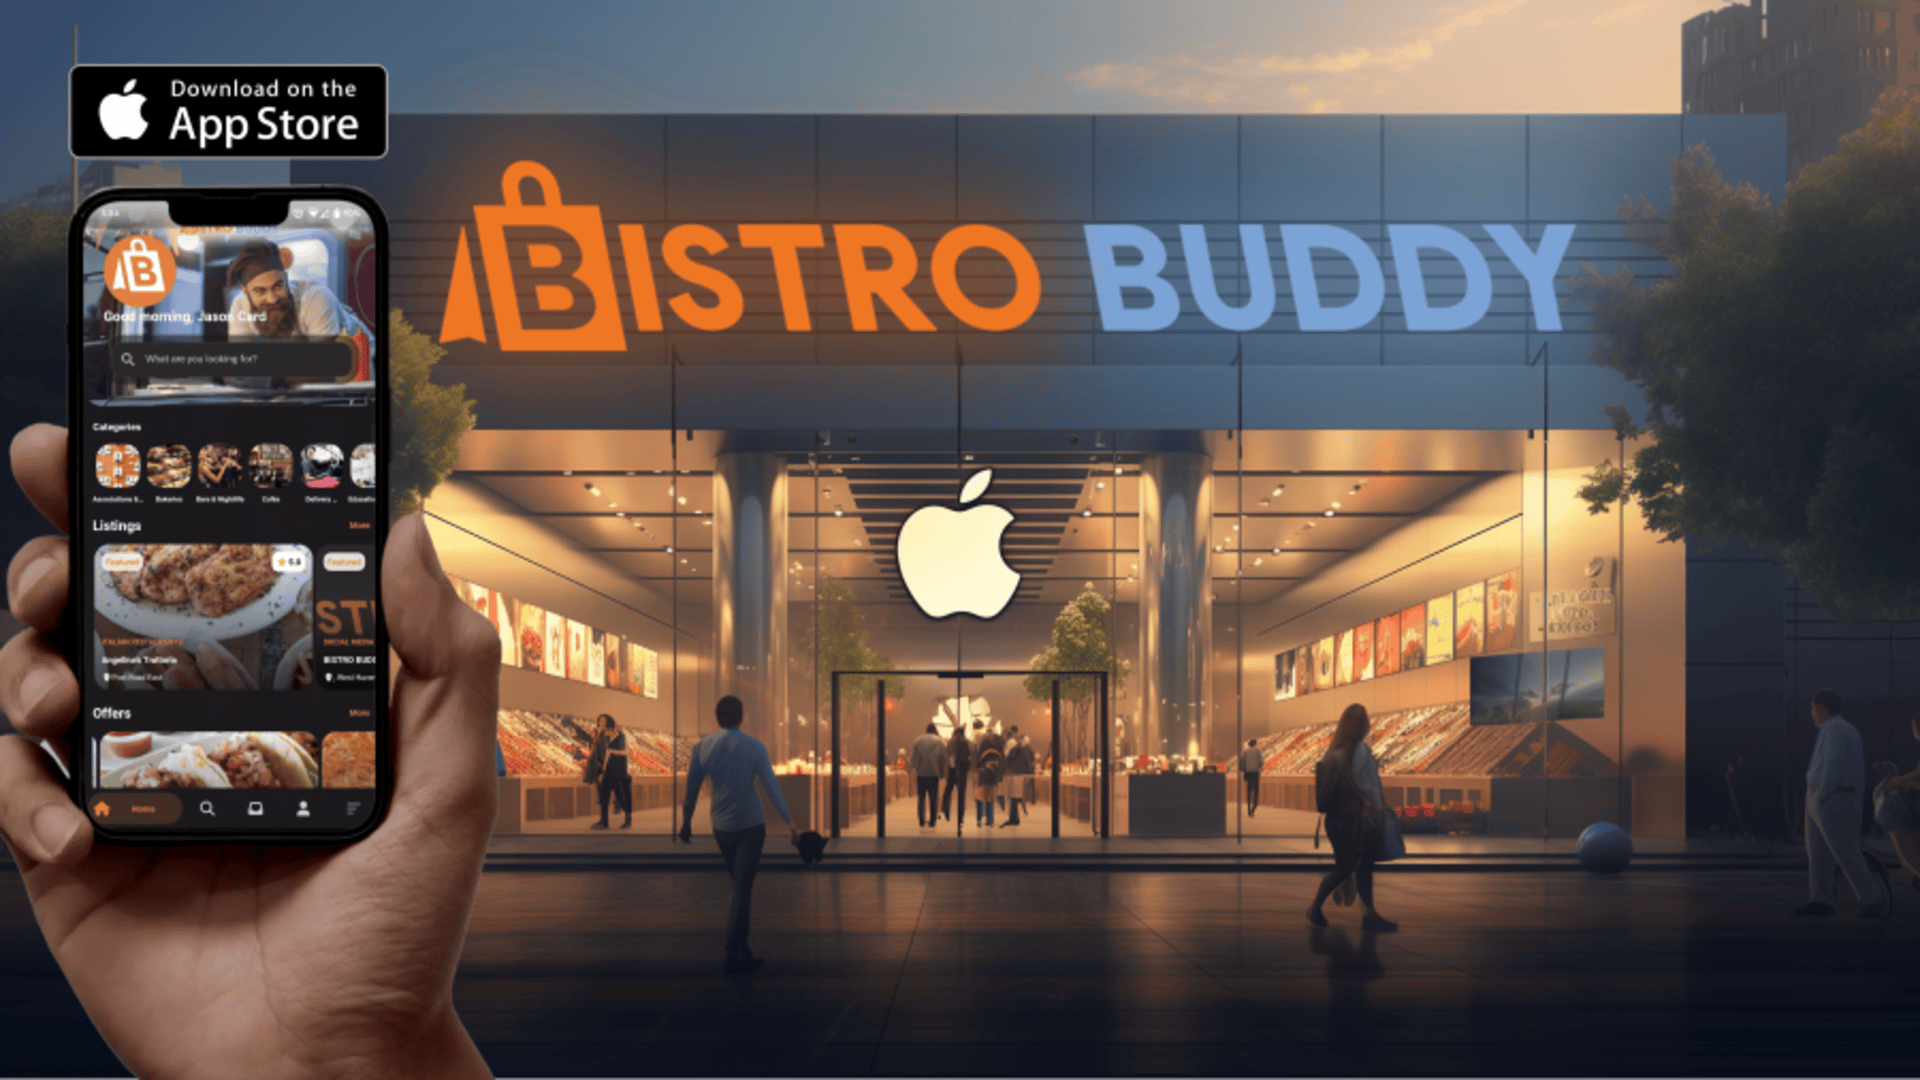 BISTRO BUDDY 1.9.1 Website and Apple Store Launch! Plus, a Message on the Ongoing Progress Towards 2.0